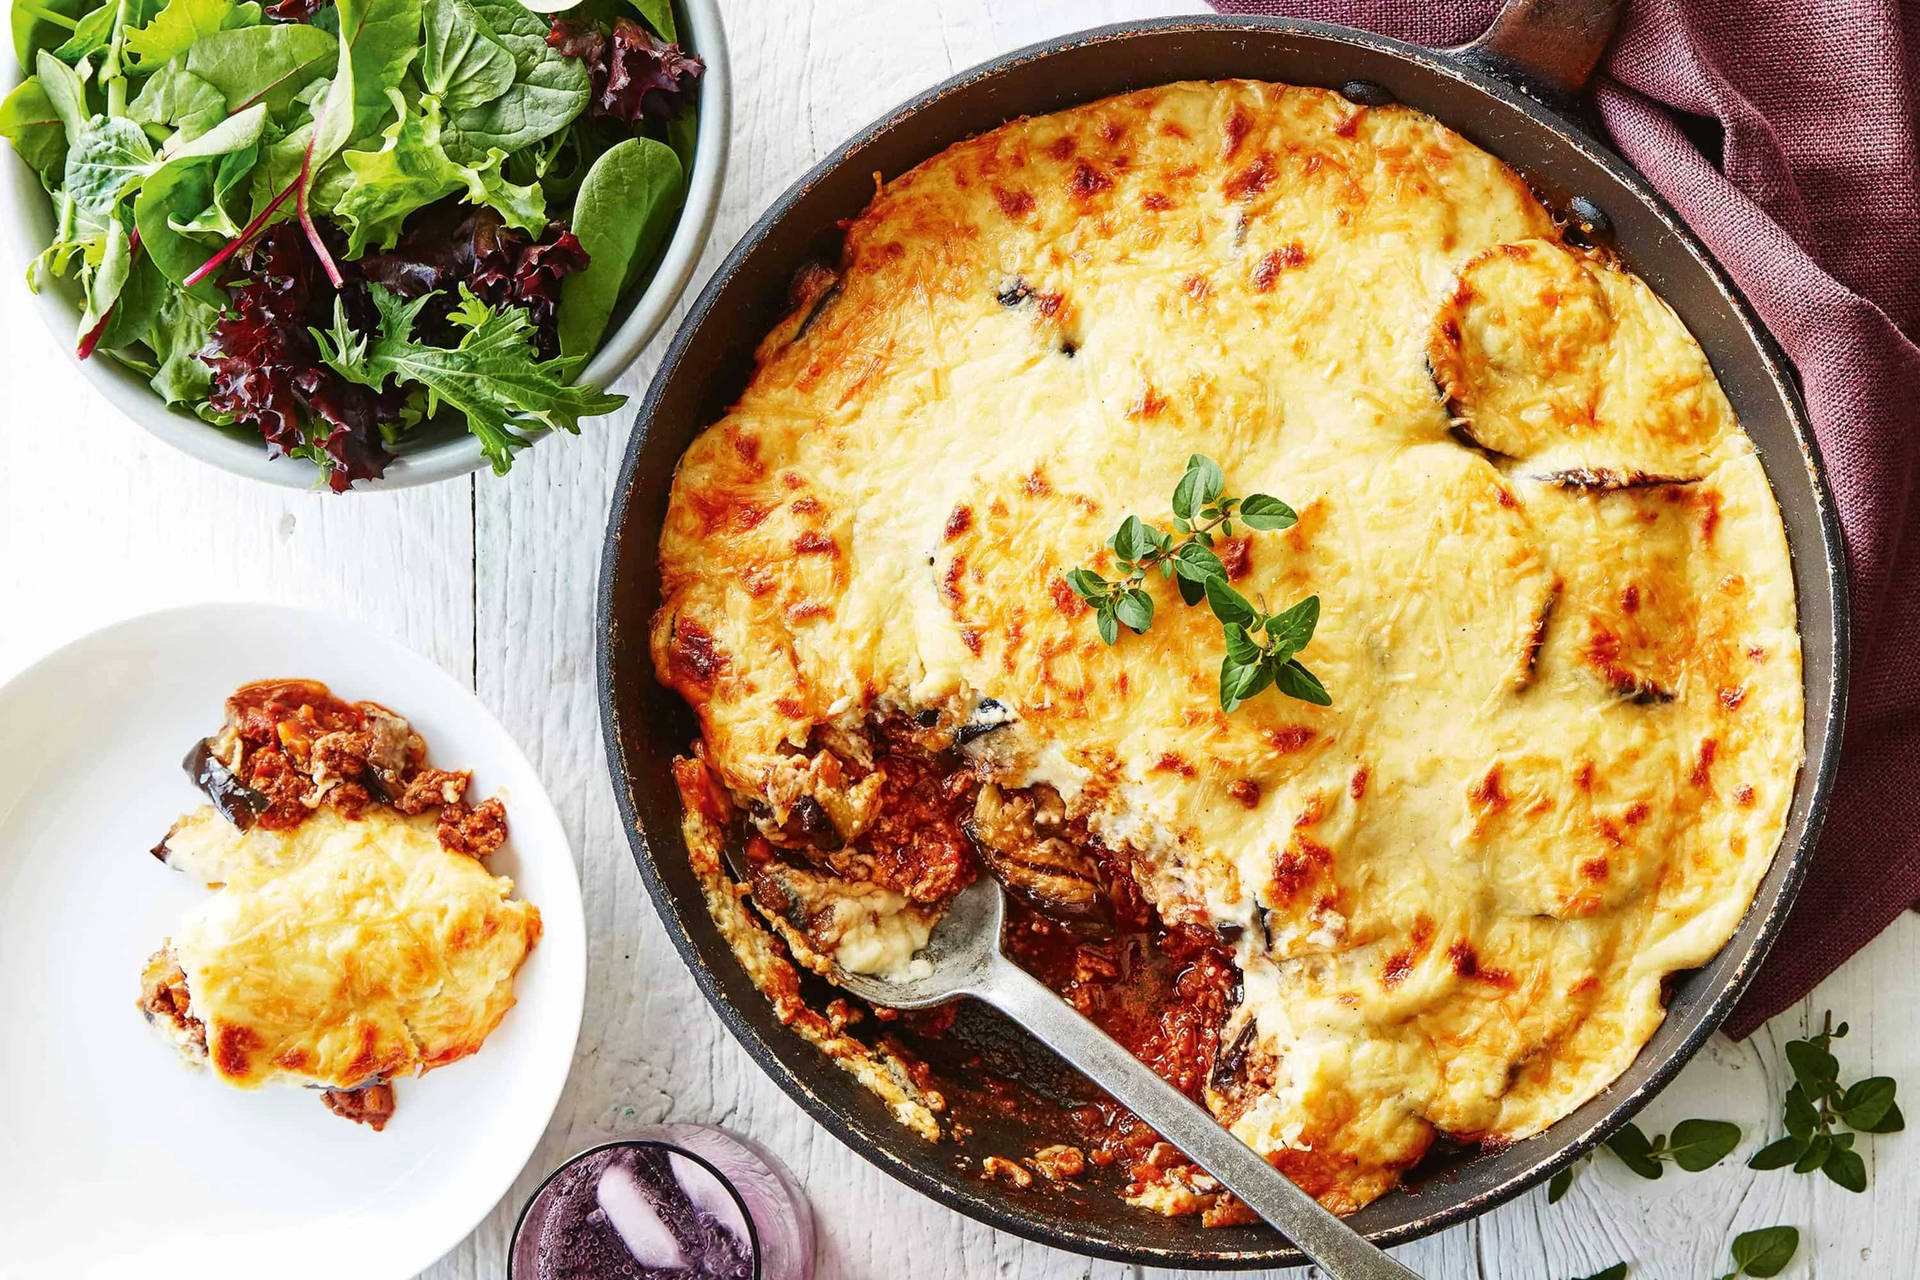 Top View of Traditional Moussaka Dish Wallpaper